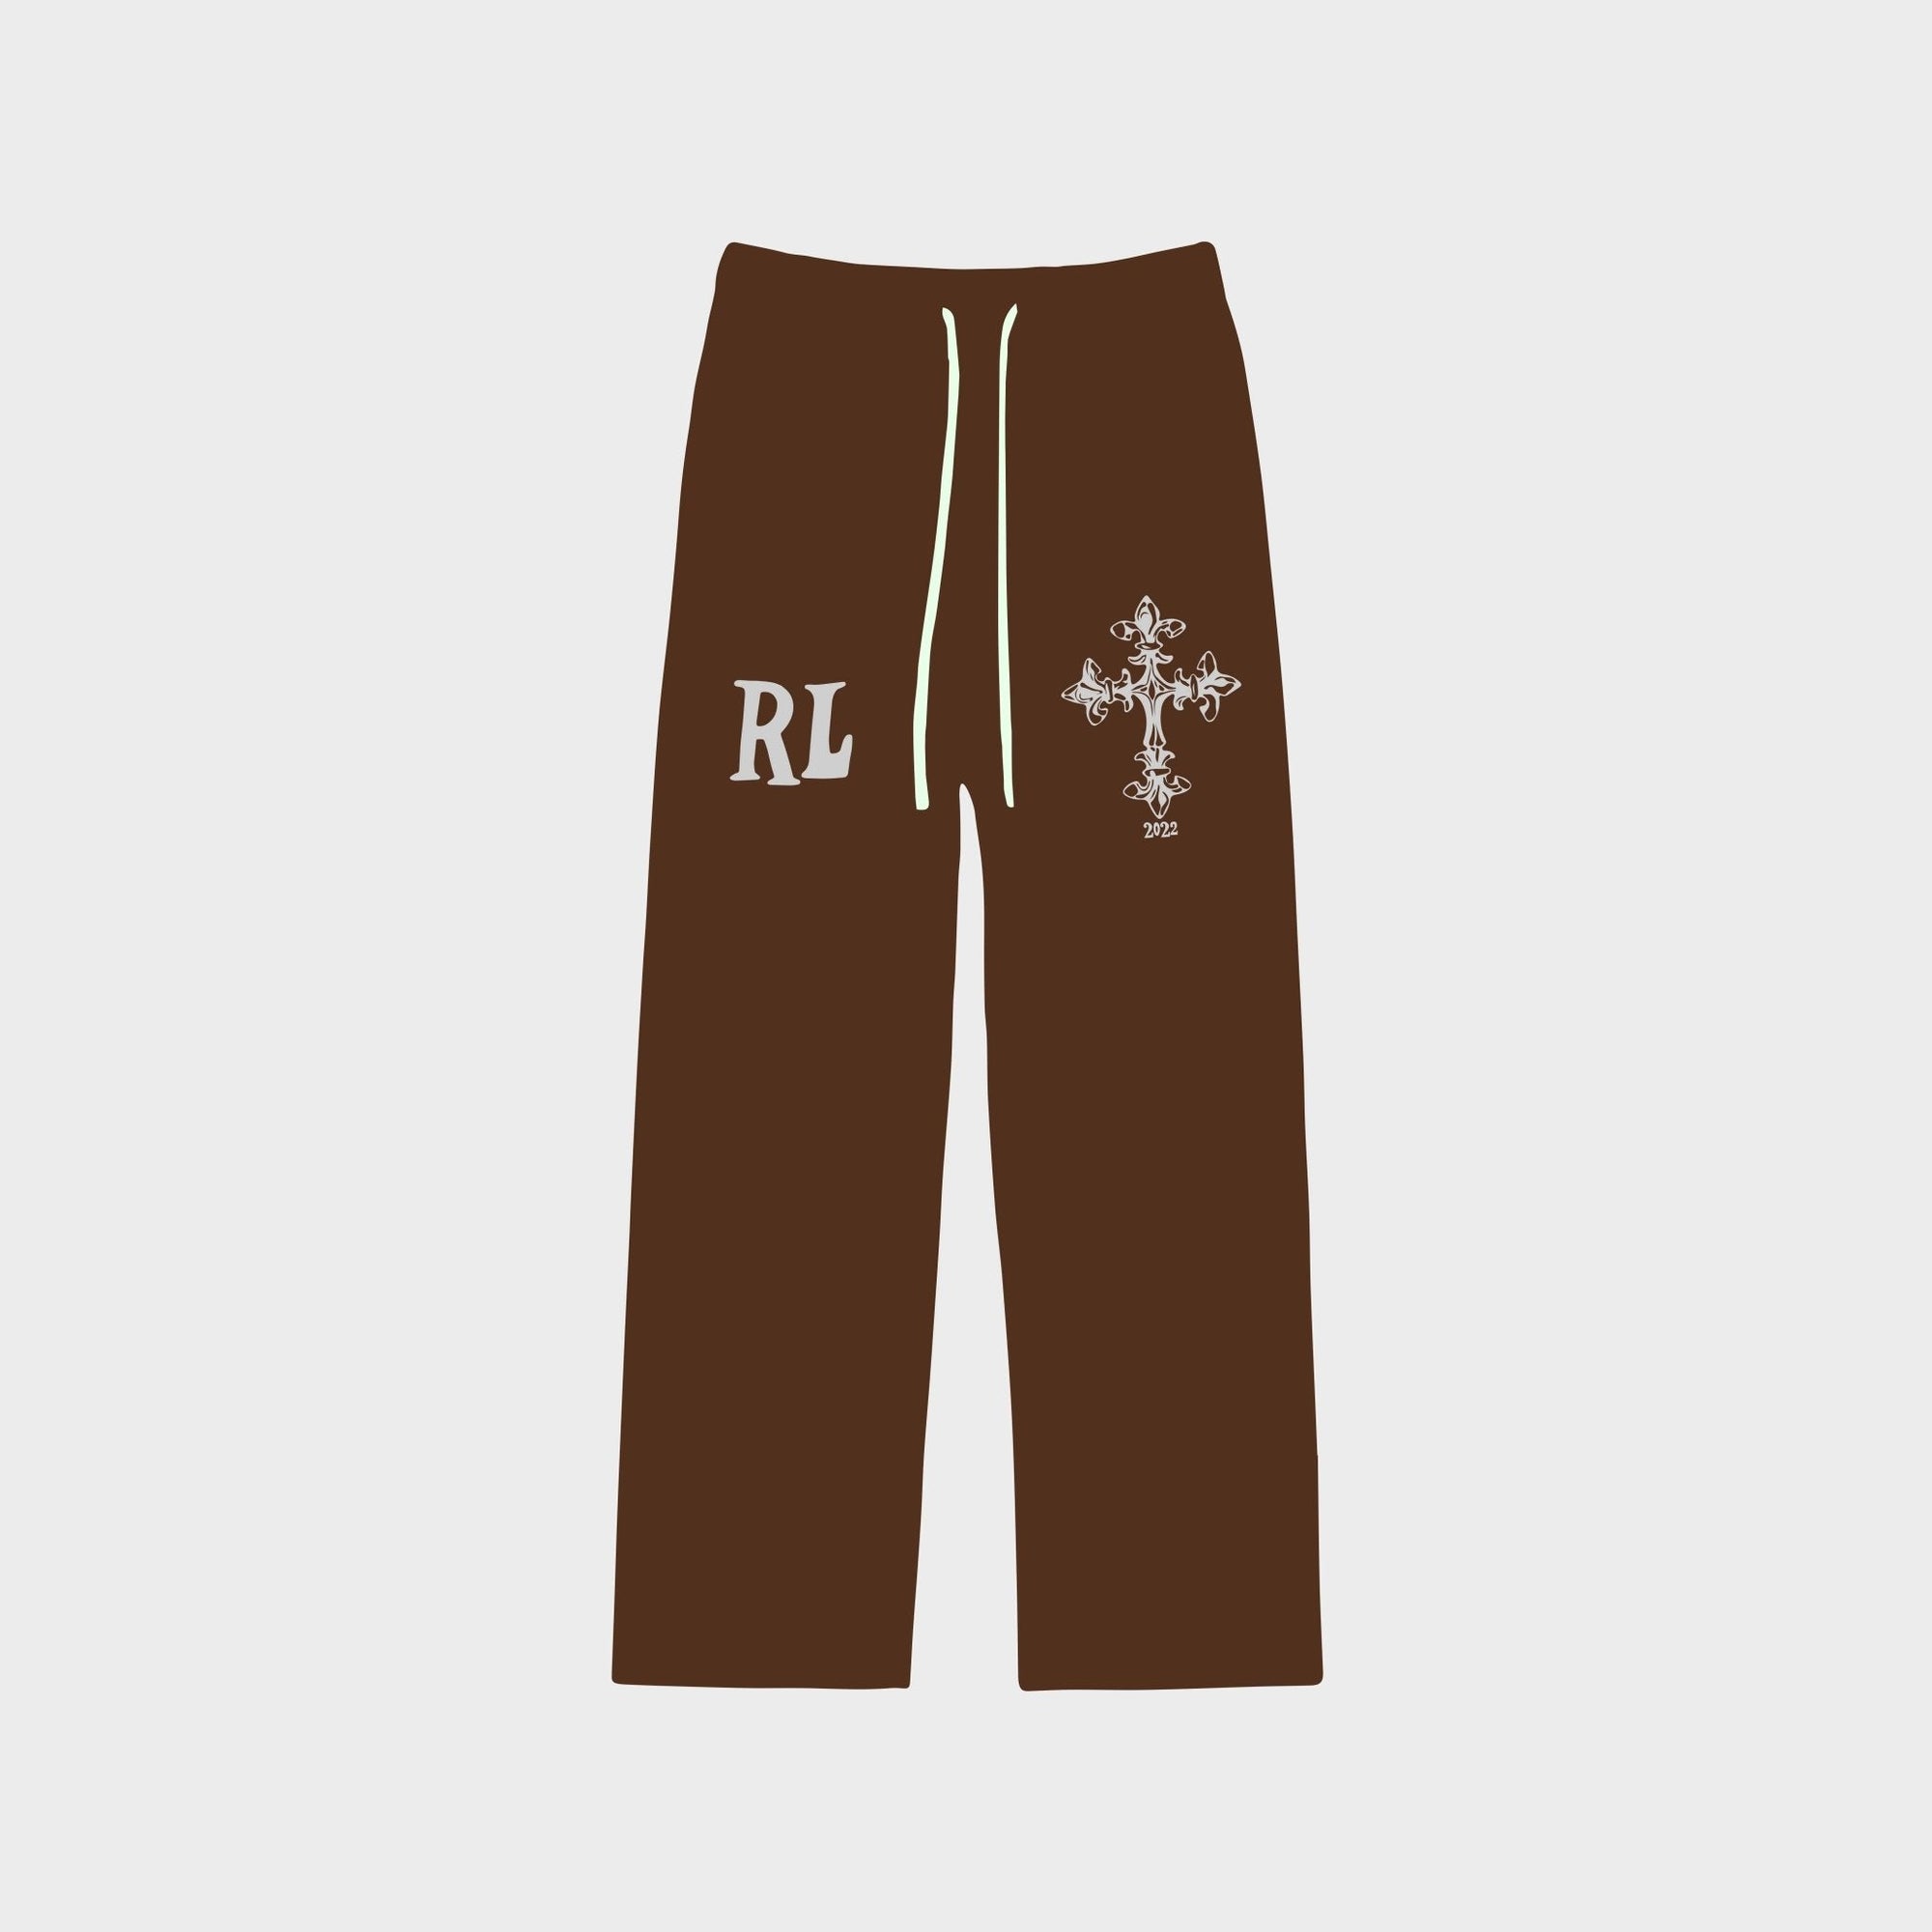 "Not Chrome" Straight Leg Pant - RED LETTERS